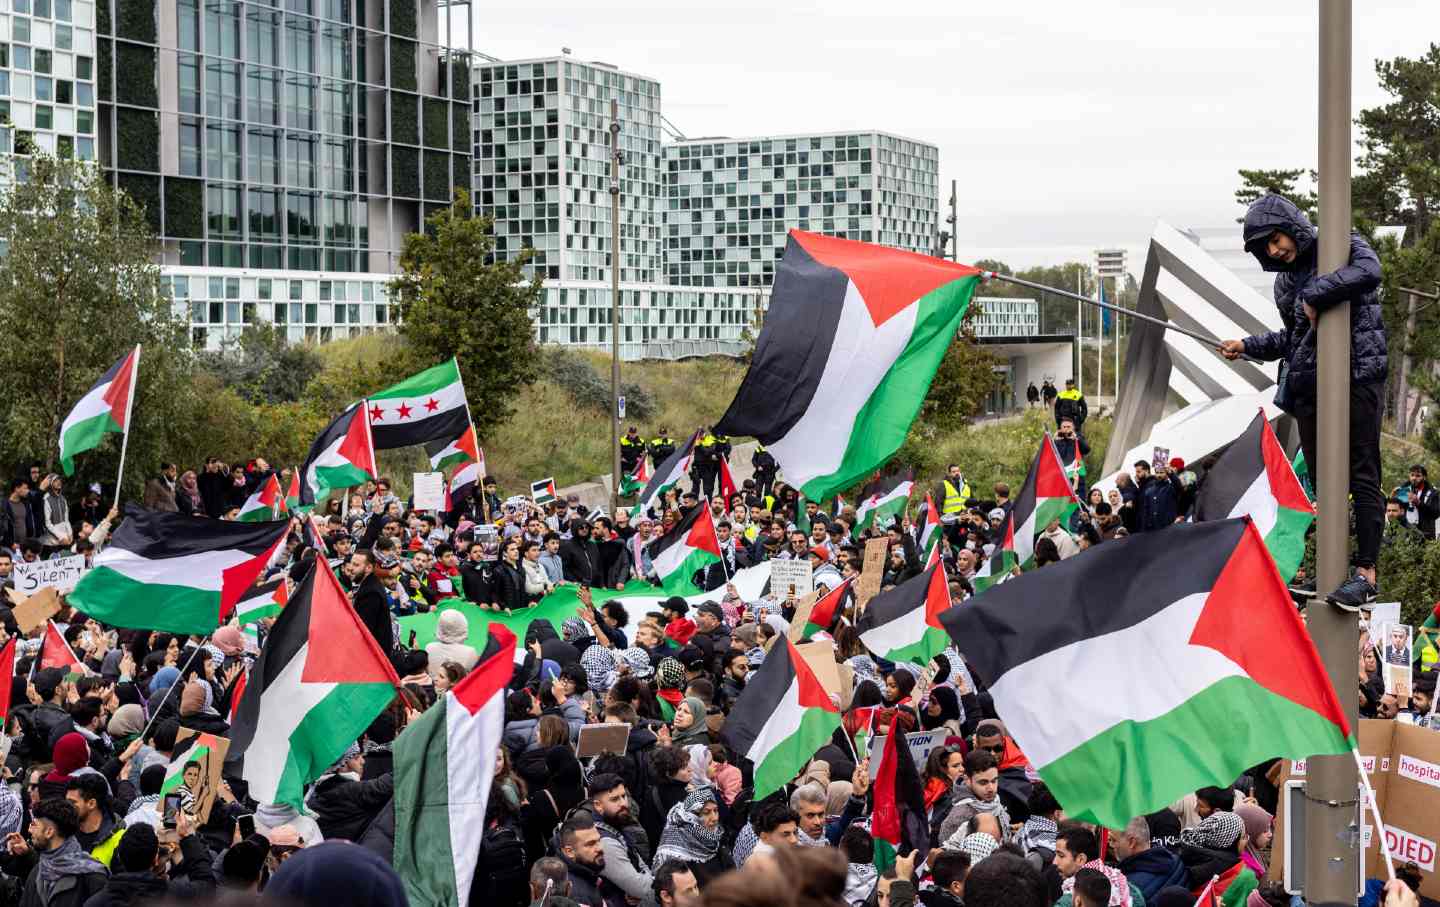 pro-Palestine protest outside International criminal court, demanding action from the ICC during ongoing bombing, genocide in Gaza